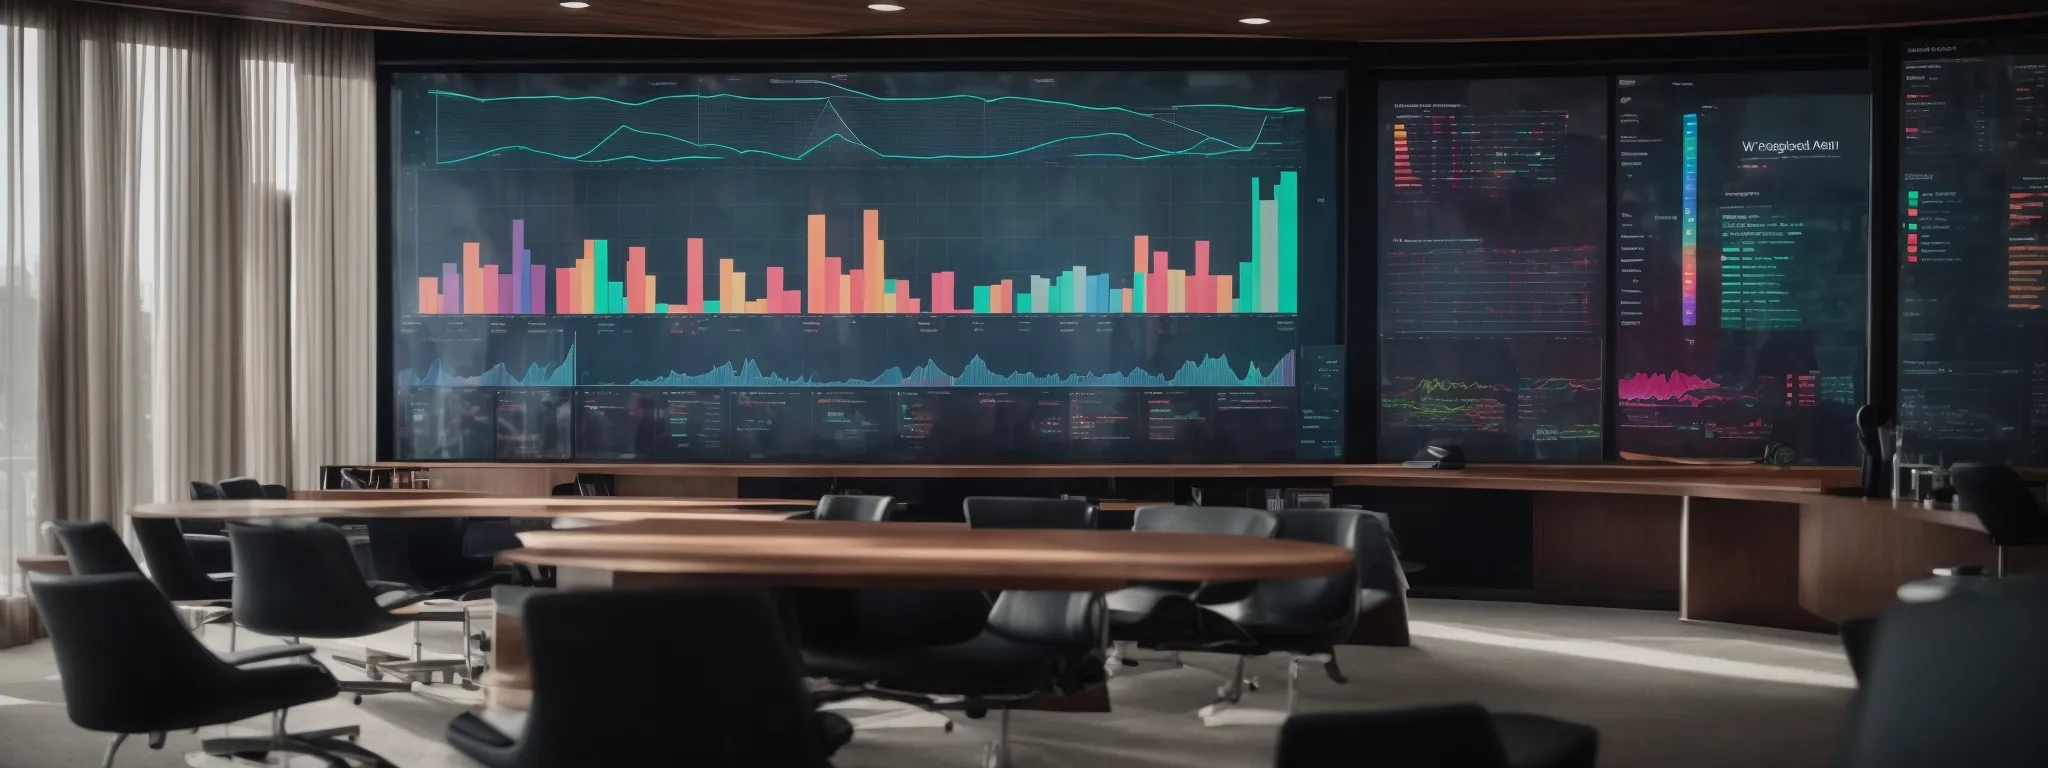 a modern corporate meeting room with a large screen displaying colorful data analytics graphs and charts.